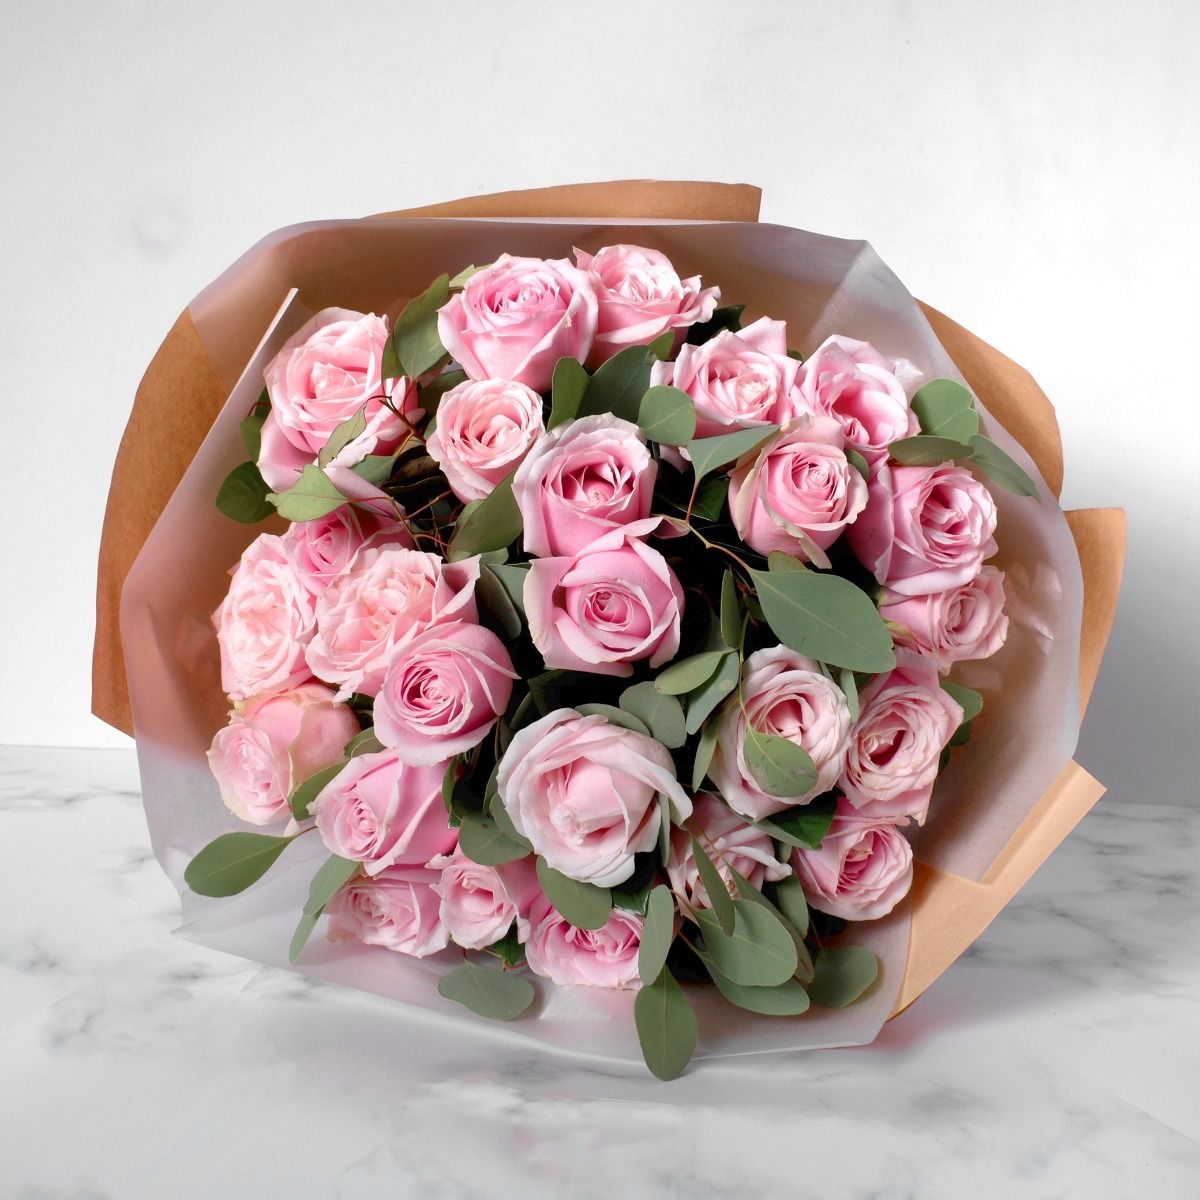 I Care For You Bouquet | Send Cheap Flowers Islamabad | SendFlowers.pk